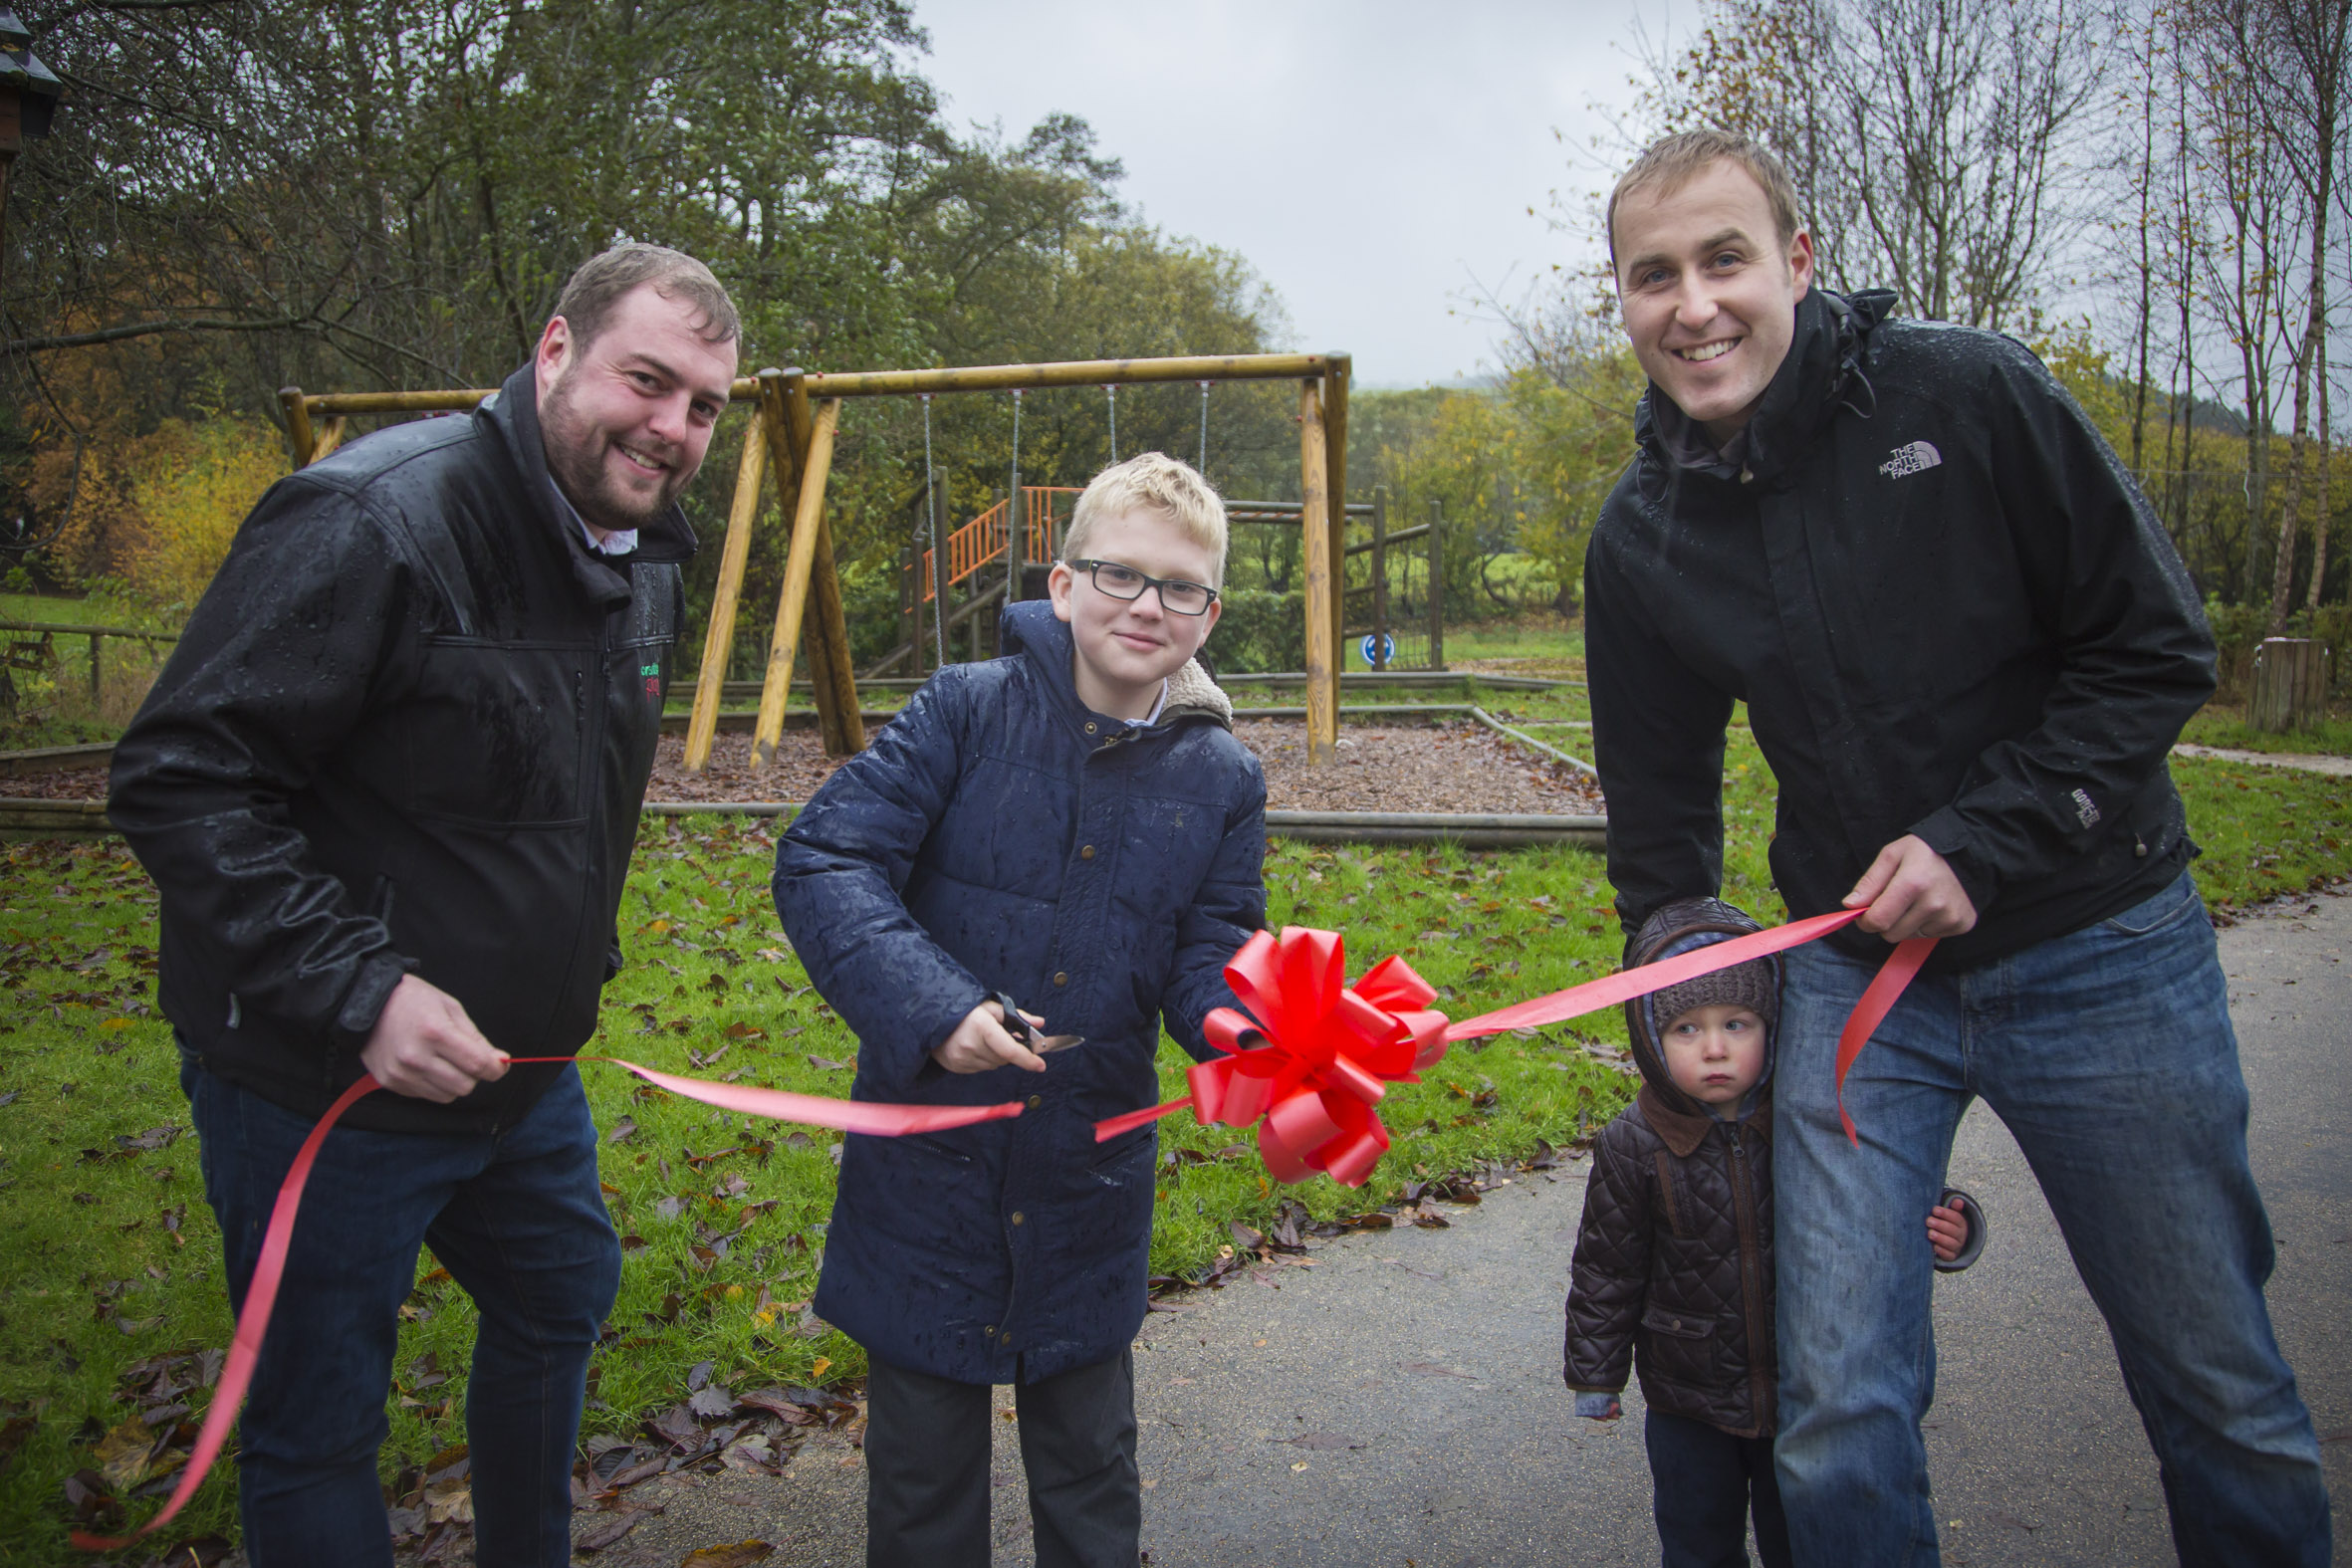 Brave Jack is VIP at official opening of playground transformed with community fundraising  